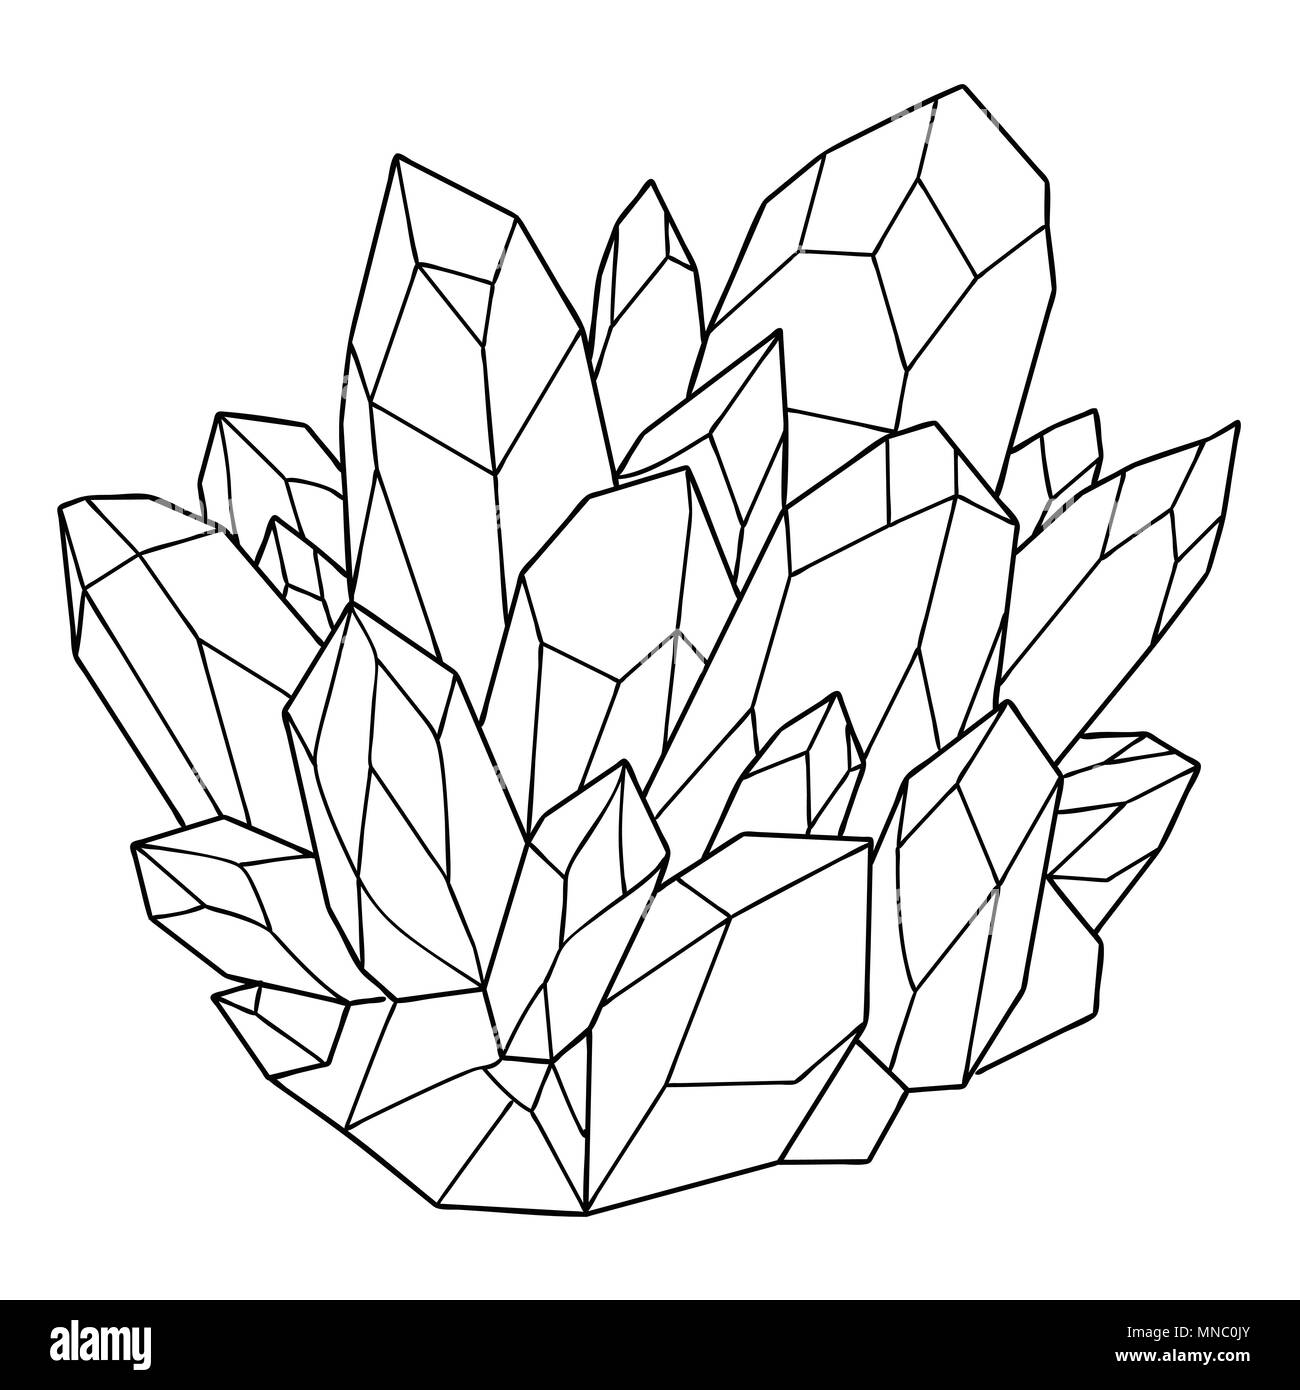 Hand drawn crystal for coloring book page and illustration. Stock Vector Stock Vector